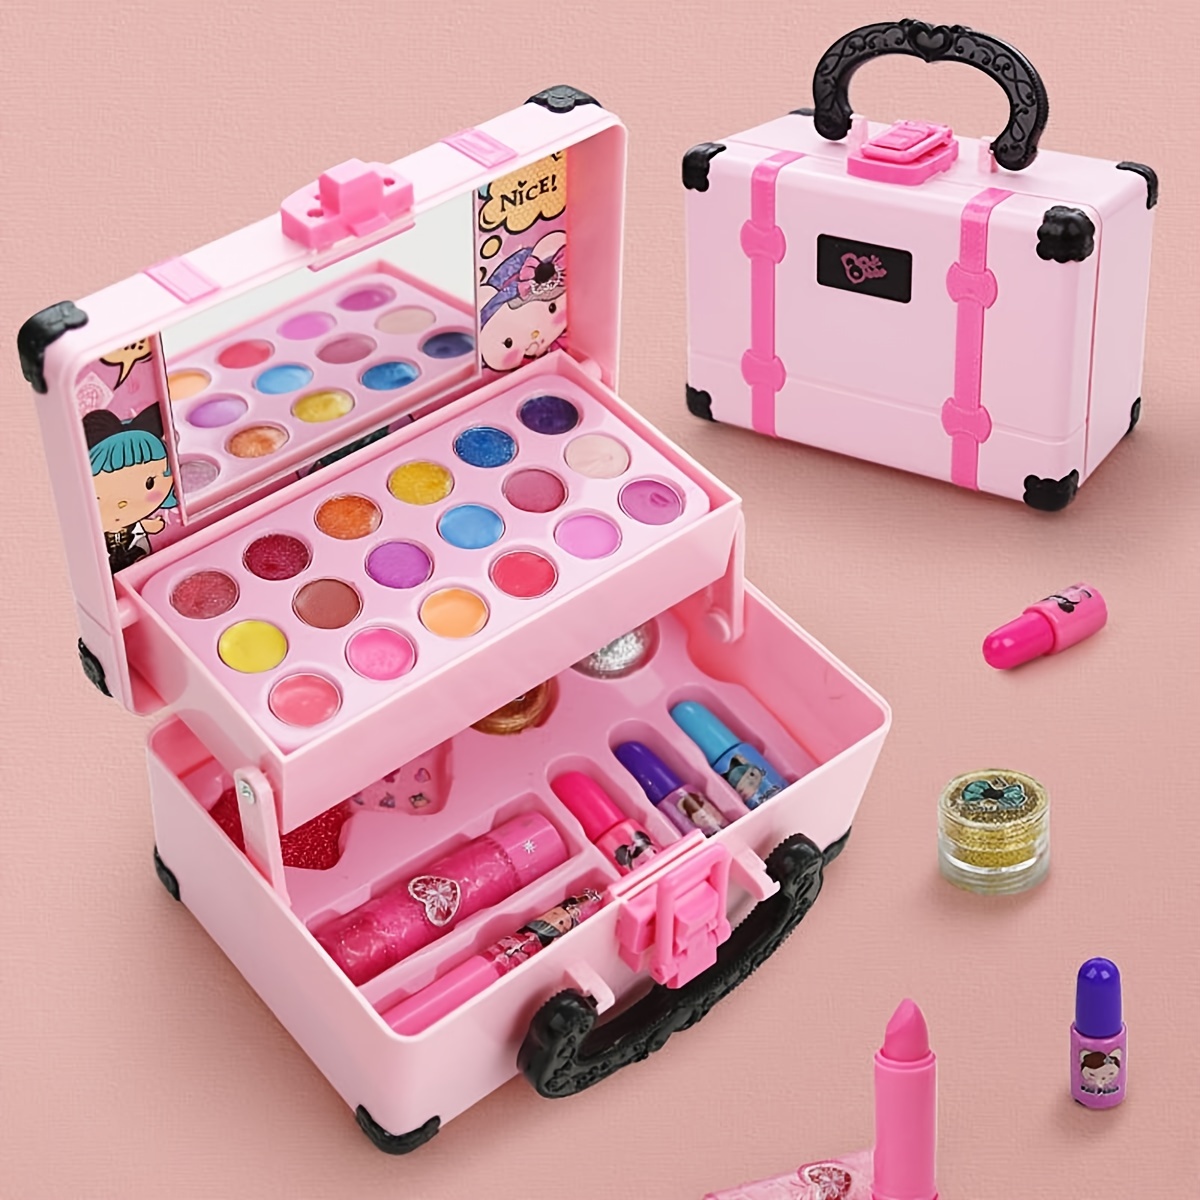 Kids Real Makeup Kit for Little Girls:with Blue Dream Bag - Real, Non  Toxic, Washable Make Up Dress Up Toy - Gift for Toddler Young Children  Pretend